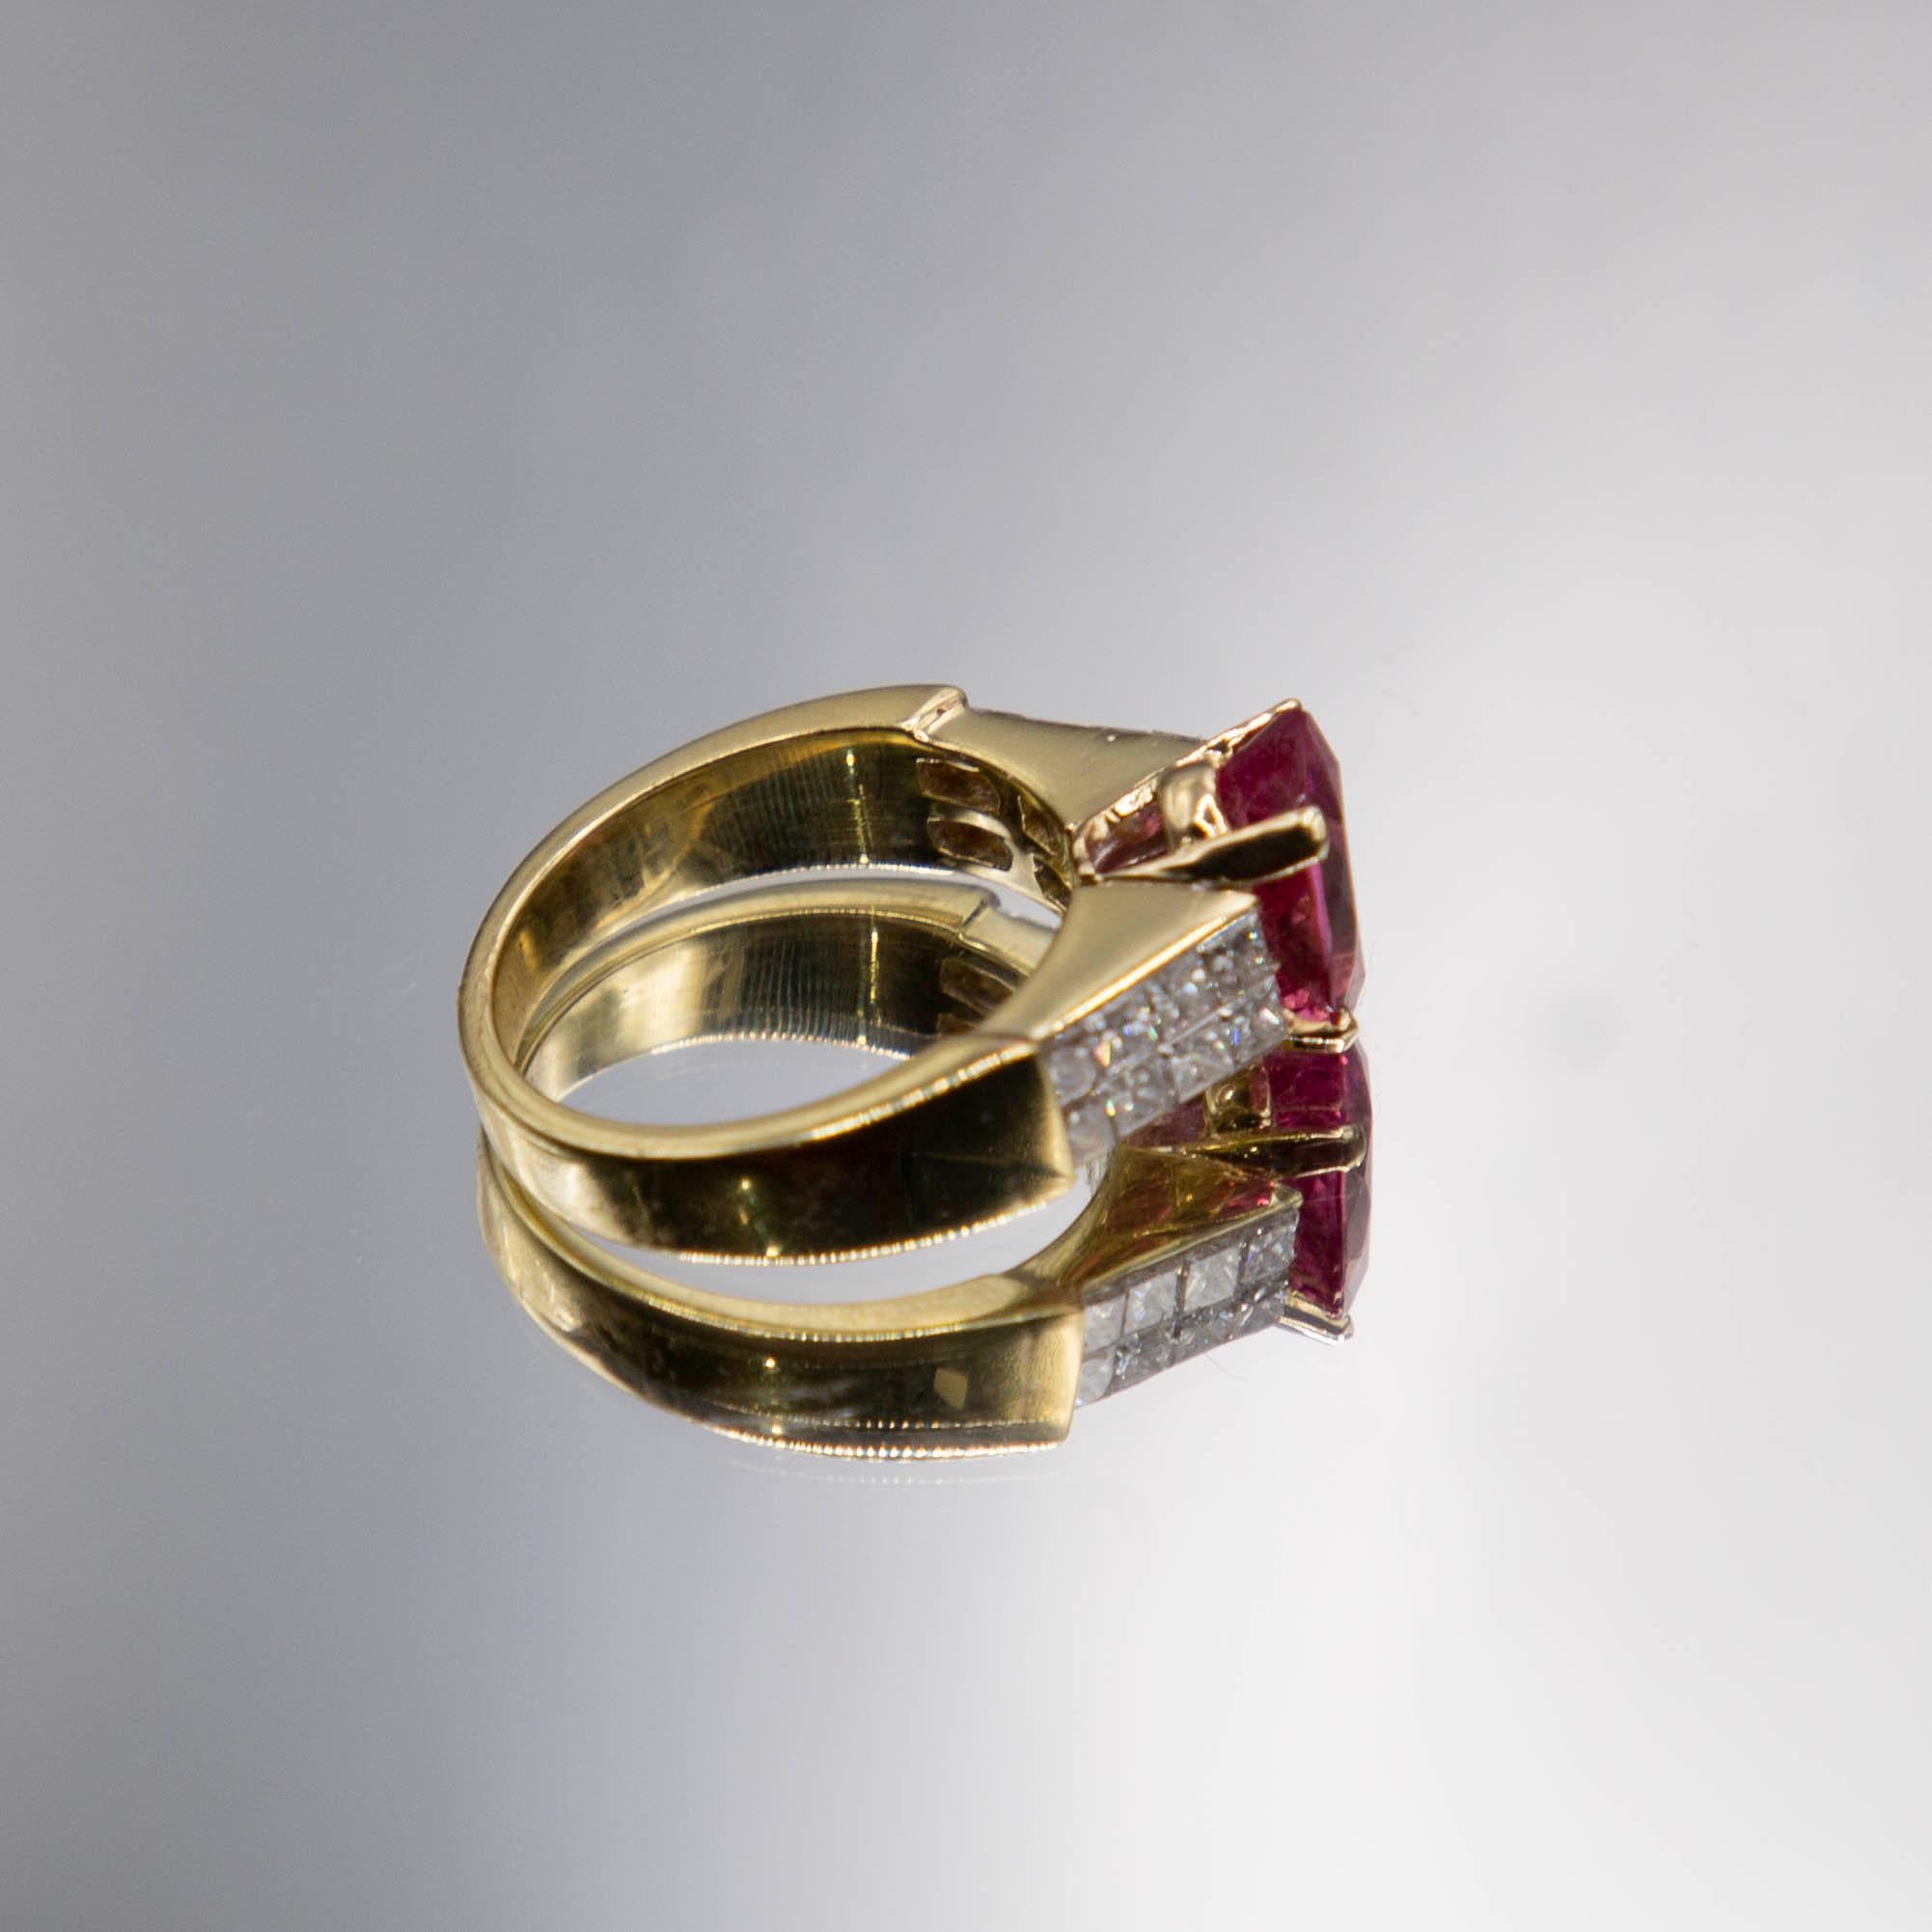 The 18k yellow gold rings features a modified 2.41 carats cushion oval hot BUBBLE GUM pink tourmaline radiating atop special invisible-set princess cut diamonds having E color and VS clarity. Total diamond weight is 1.00 carats. 